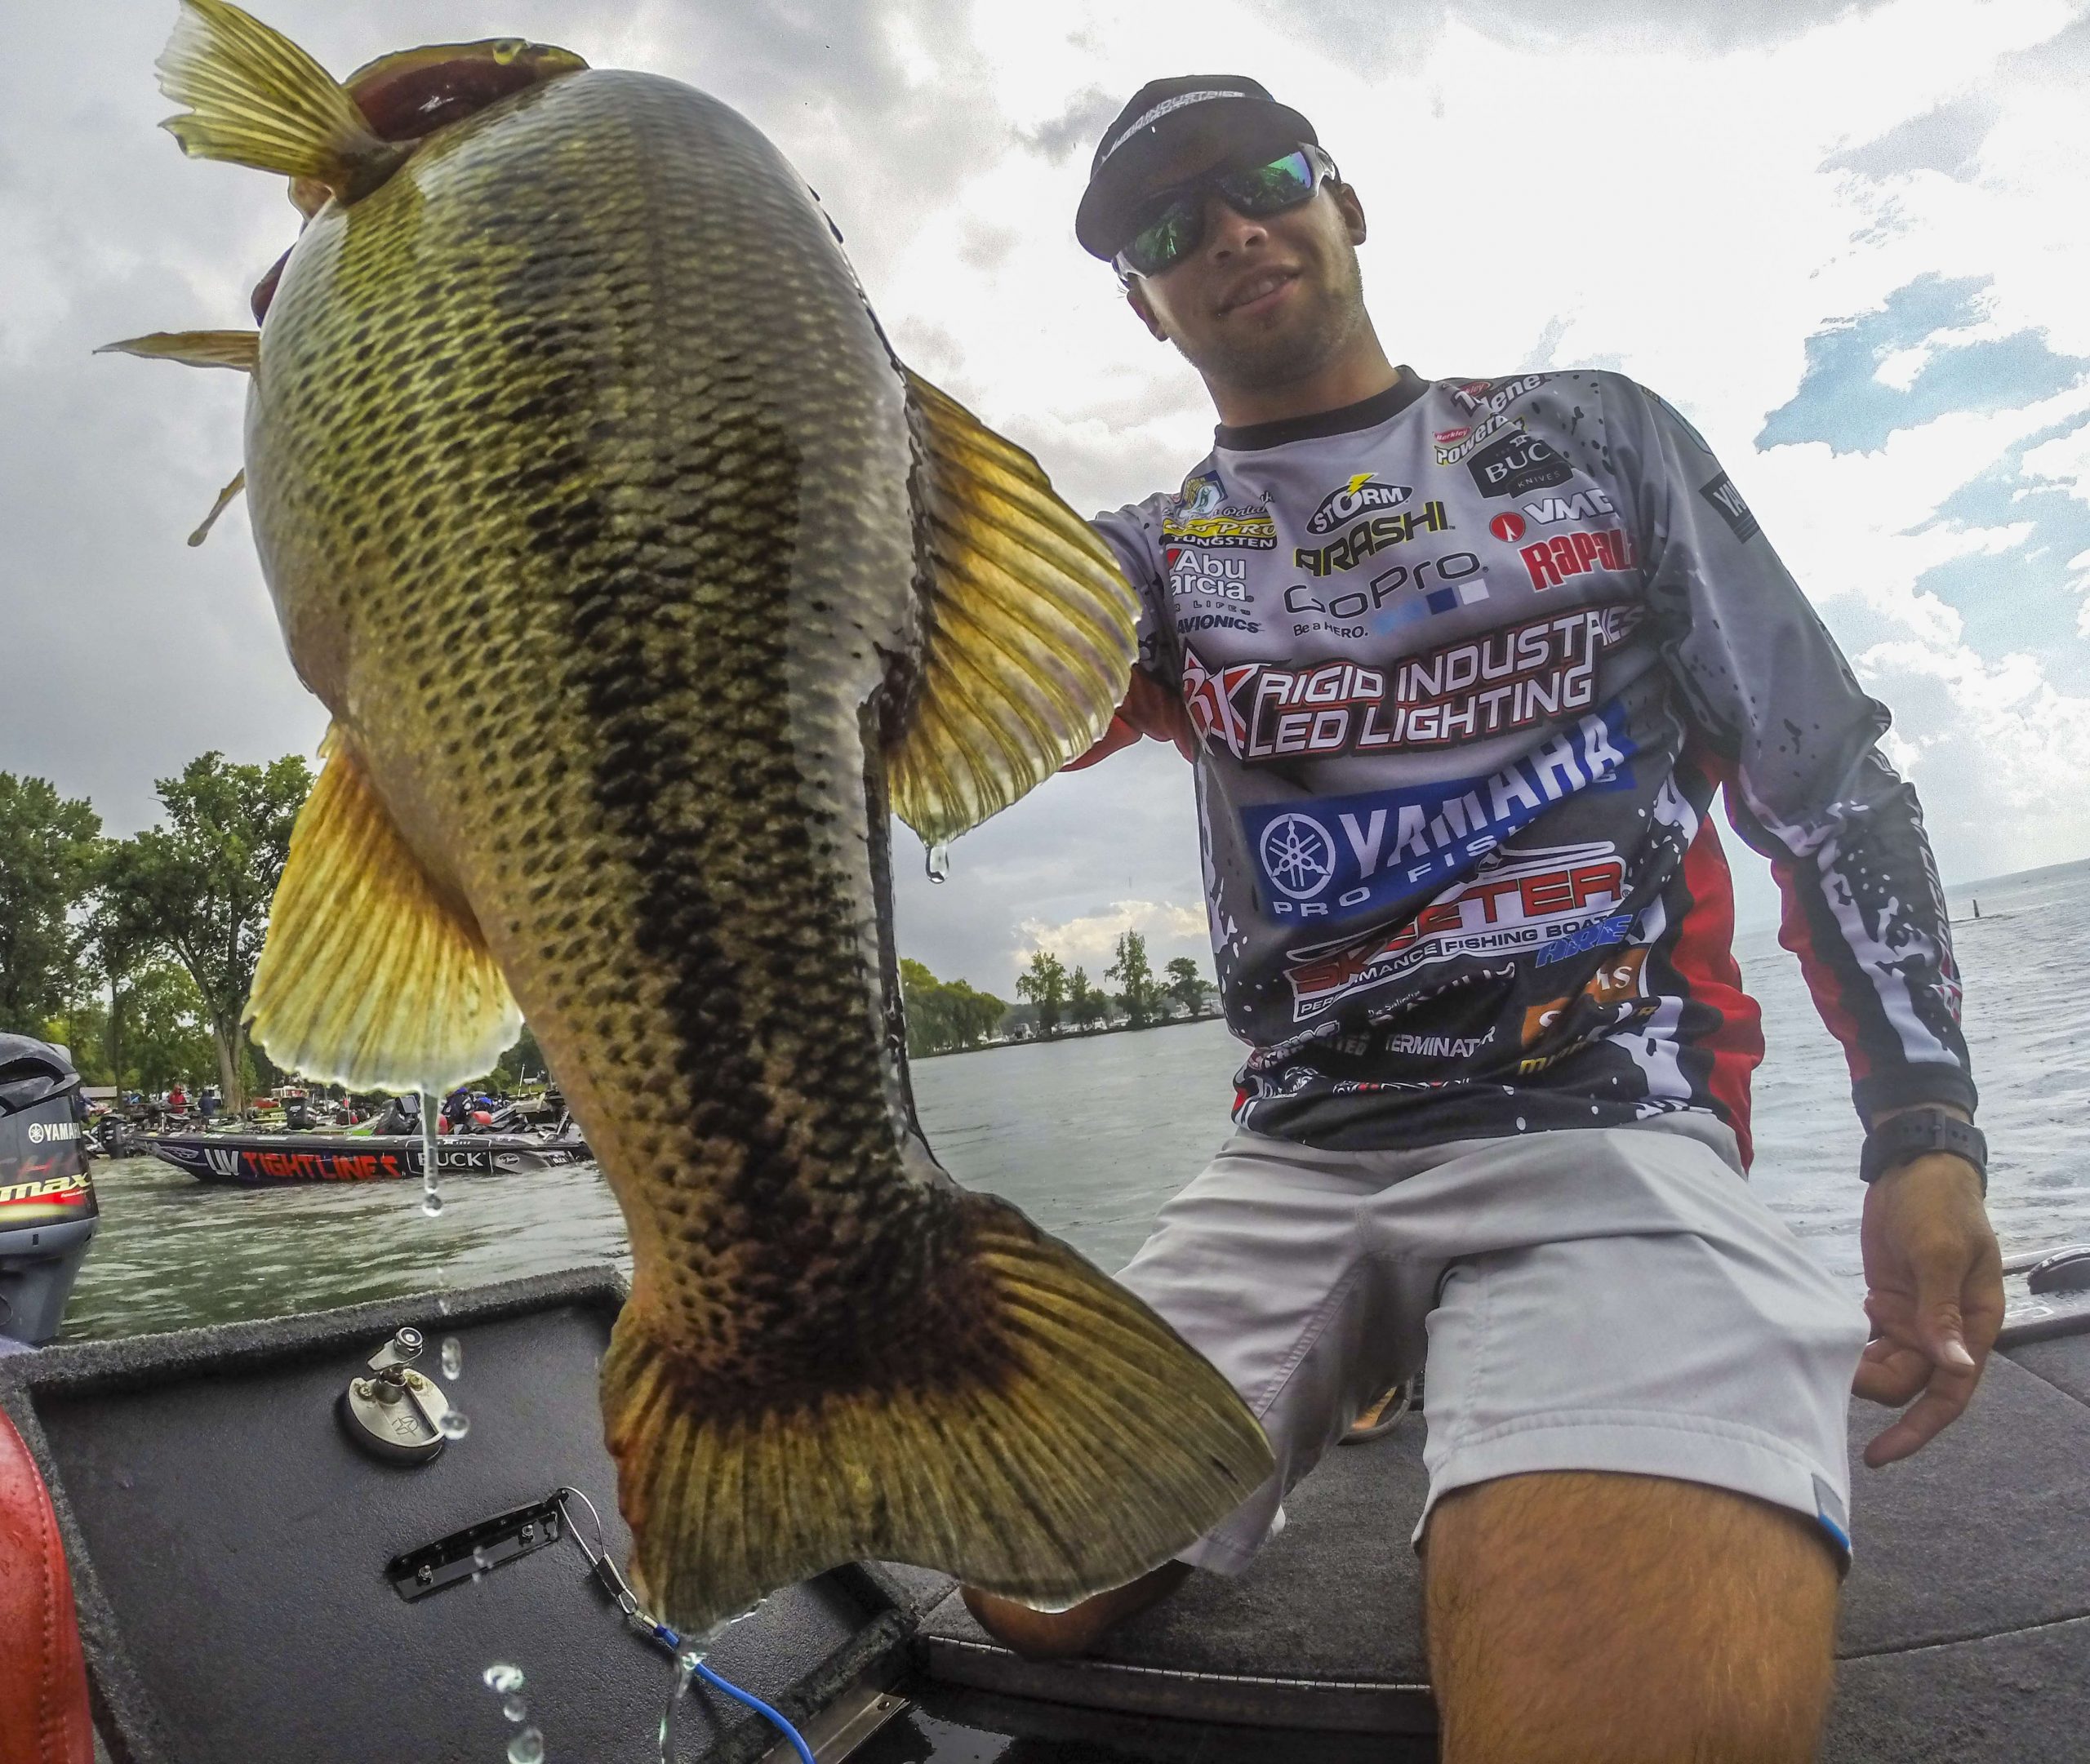 Photographer Garrick Dixon shares his favorite photos from the A.R.E. Truck Caps Bassmaster Elite on Cayuga Lake. Here's Brandon Palaniuk showing off a catch.